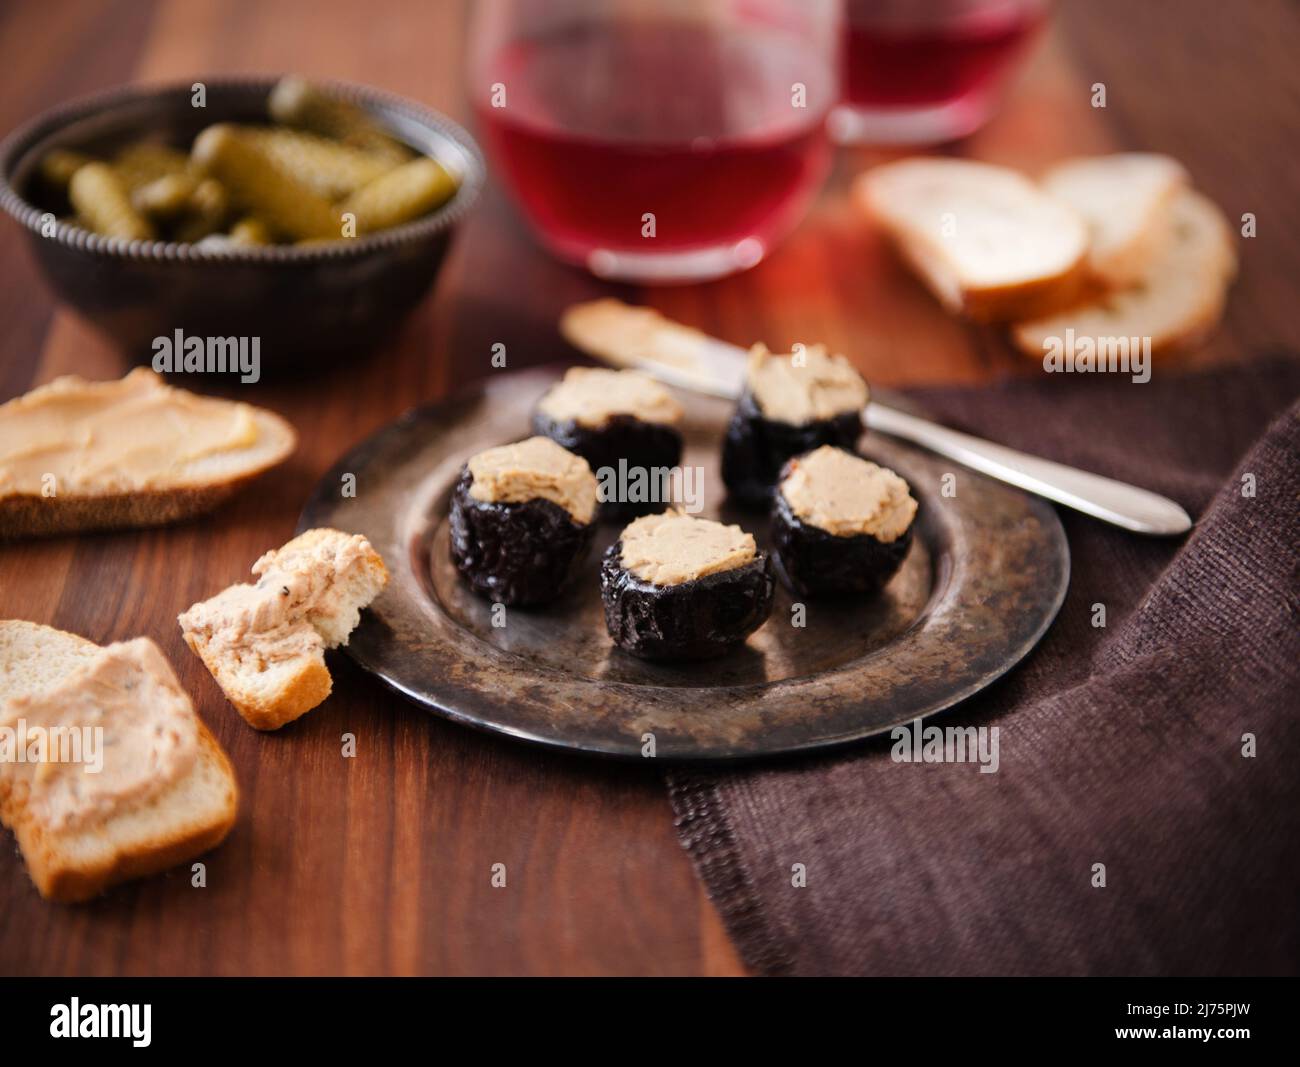 Prunes Stuffed with Foie Gras on a Metal Dish; Bread and Foie Gras; Pickles; Wine Stock Photo